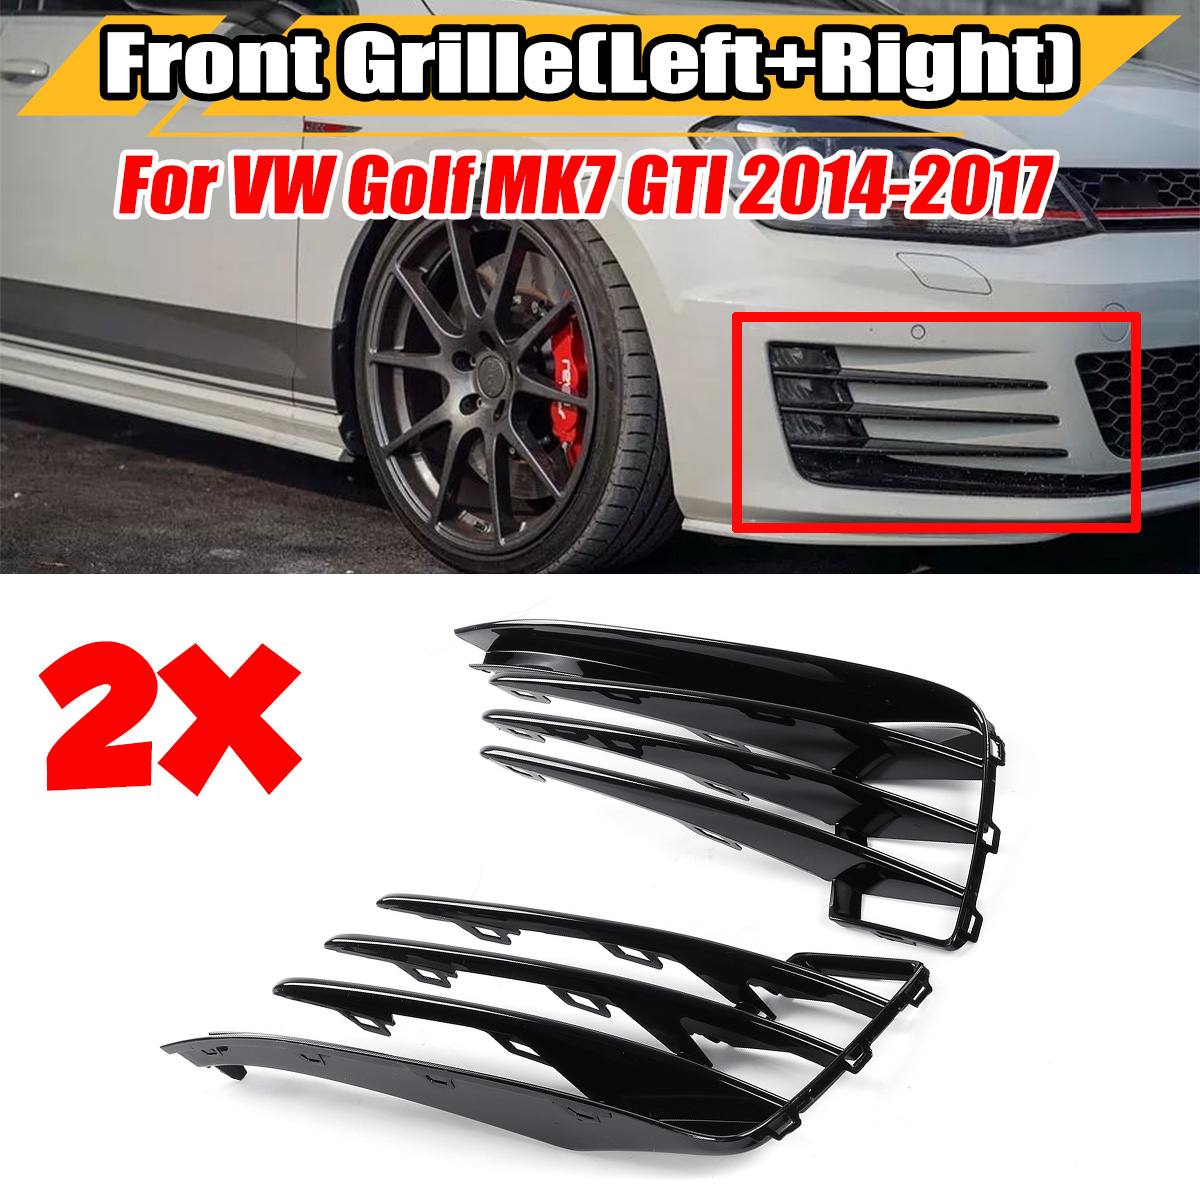 Glossy Black MK7 2Xcar Mistlampen Grille Grill Lagere Bumper Grill Cover Voor Vw Voor Golf MK7 gti 5G0853665E/6E